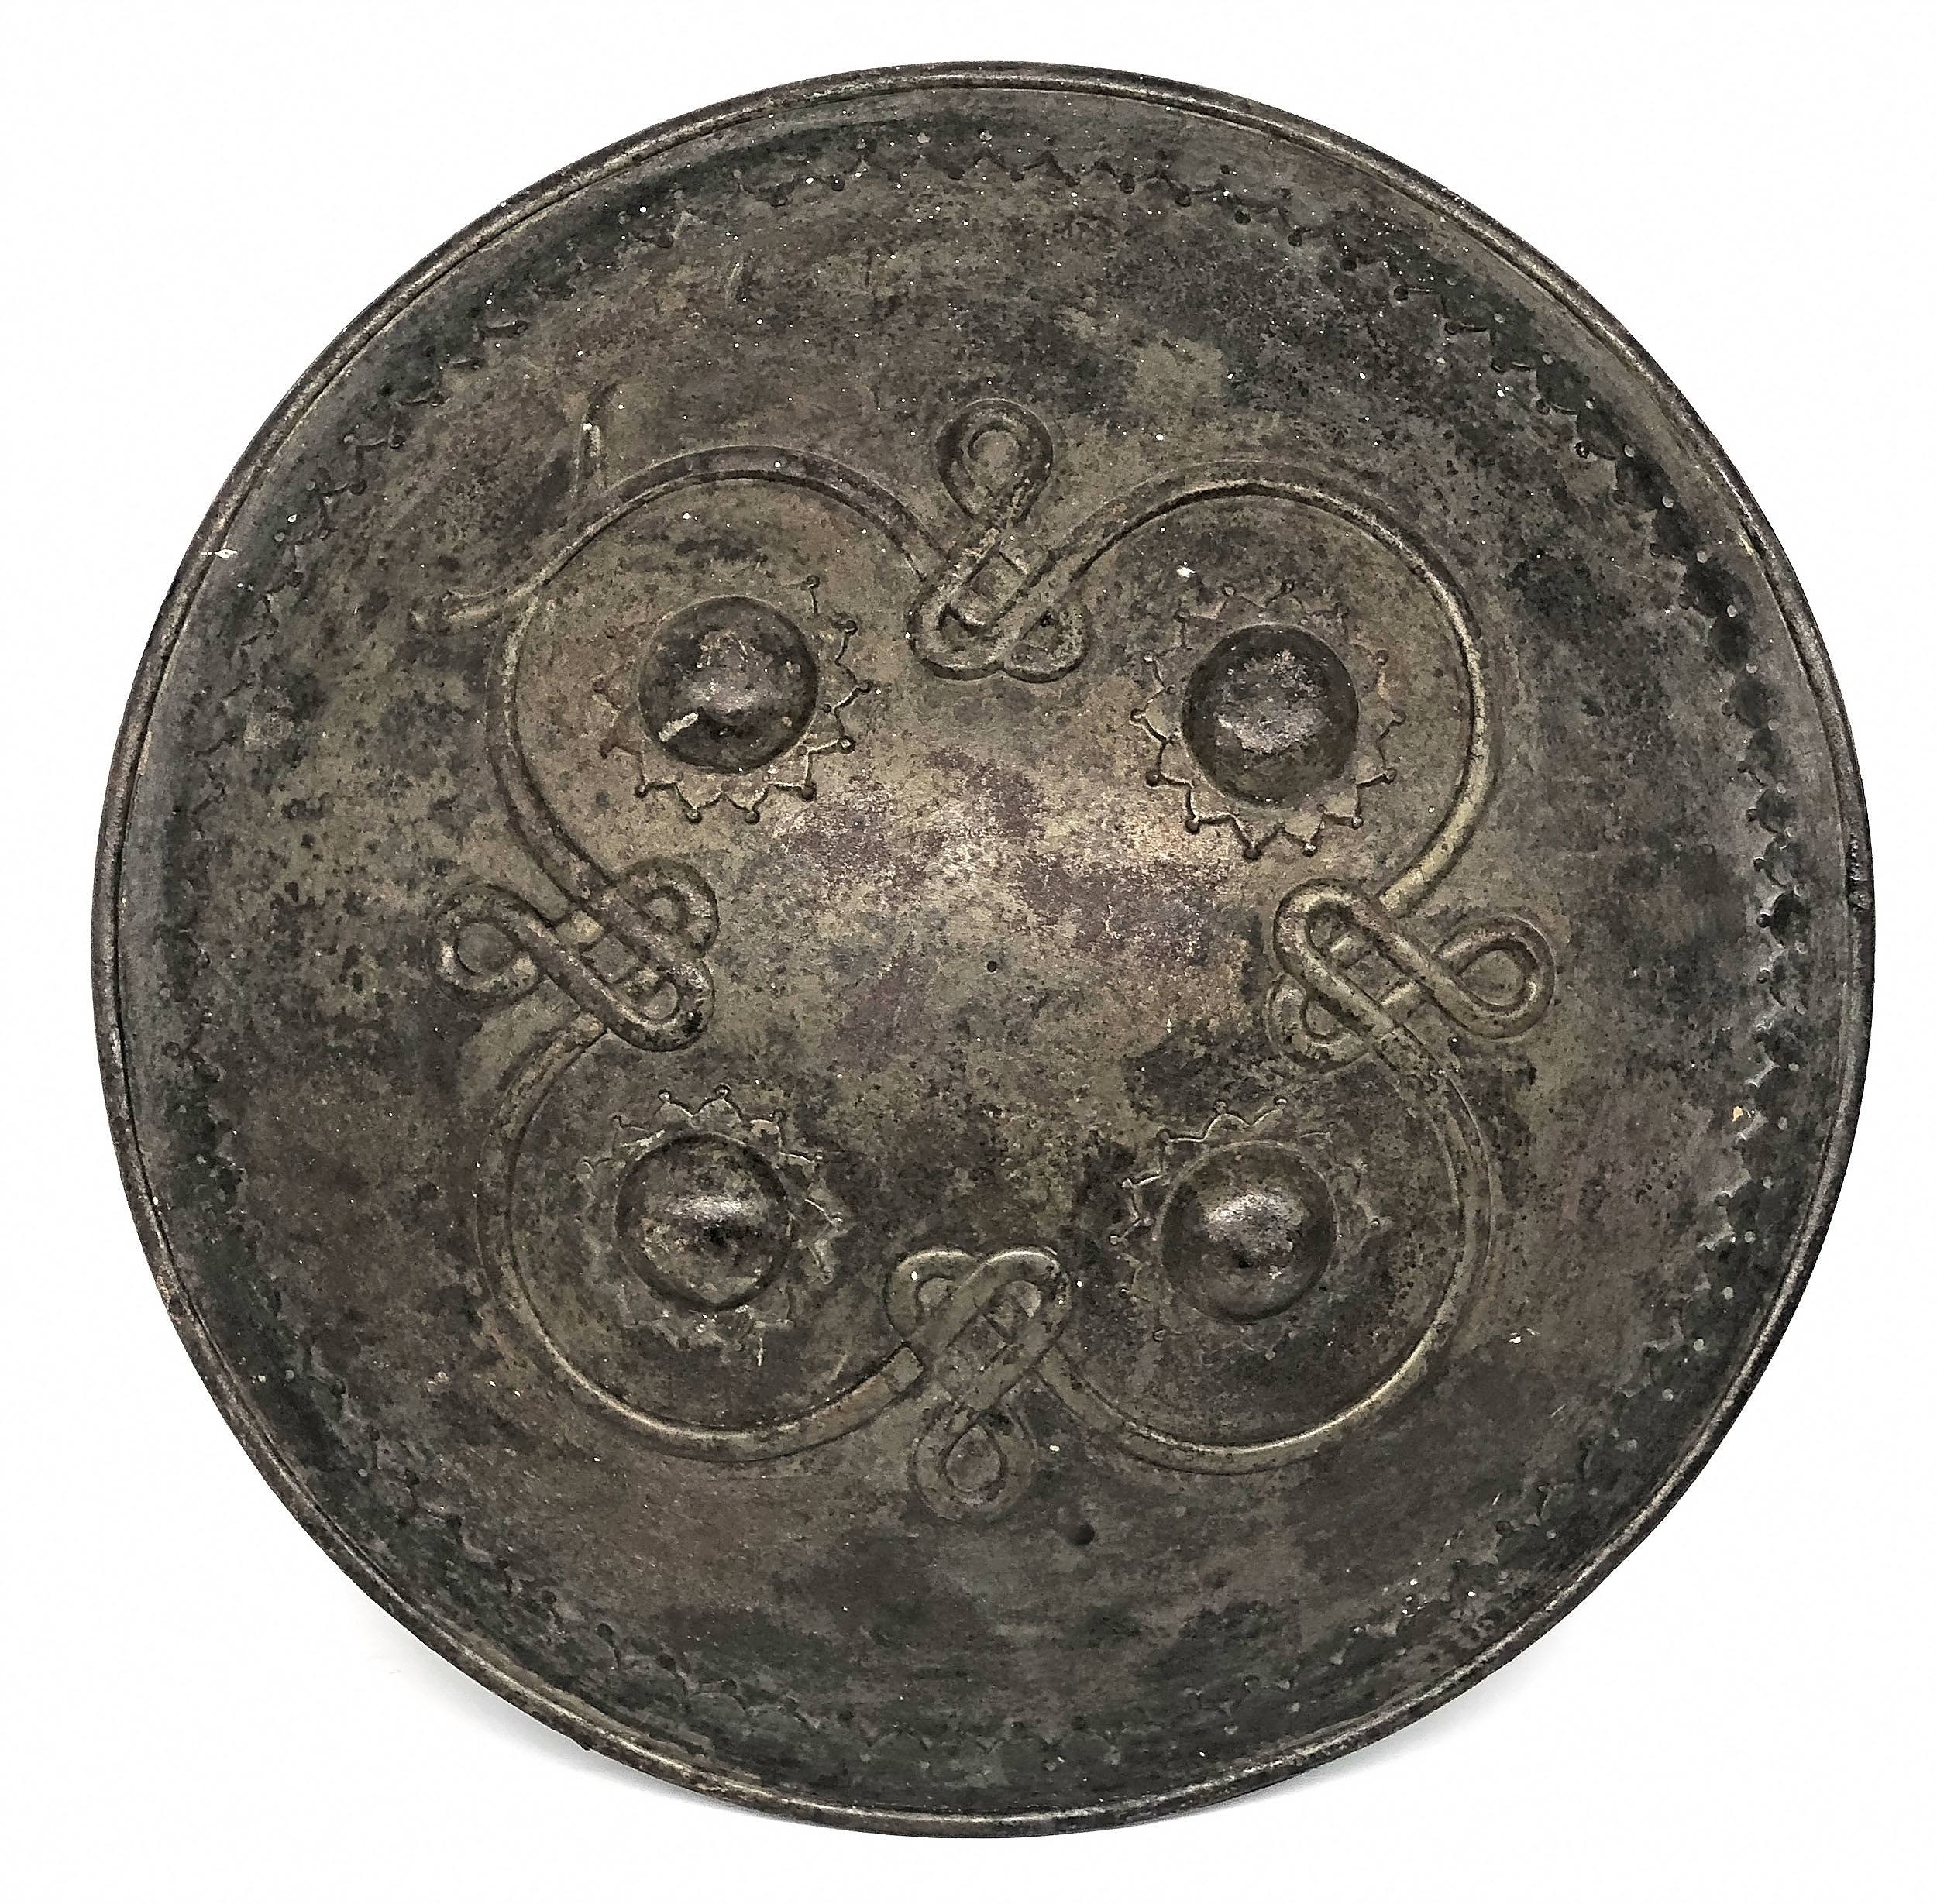 'Indian Iron Dhal Shield'